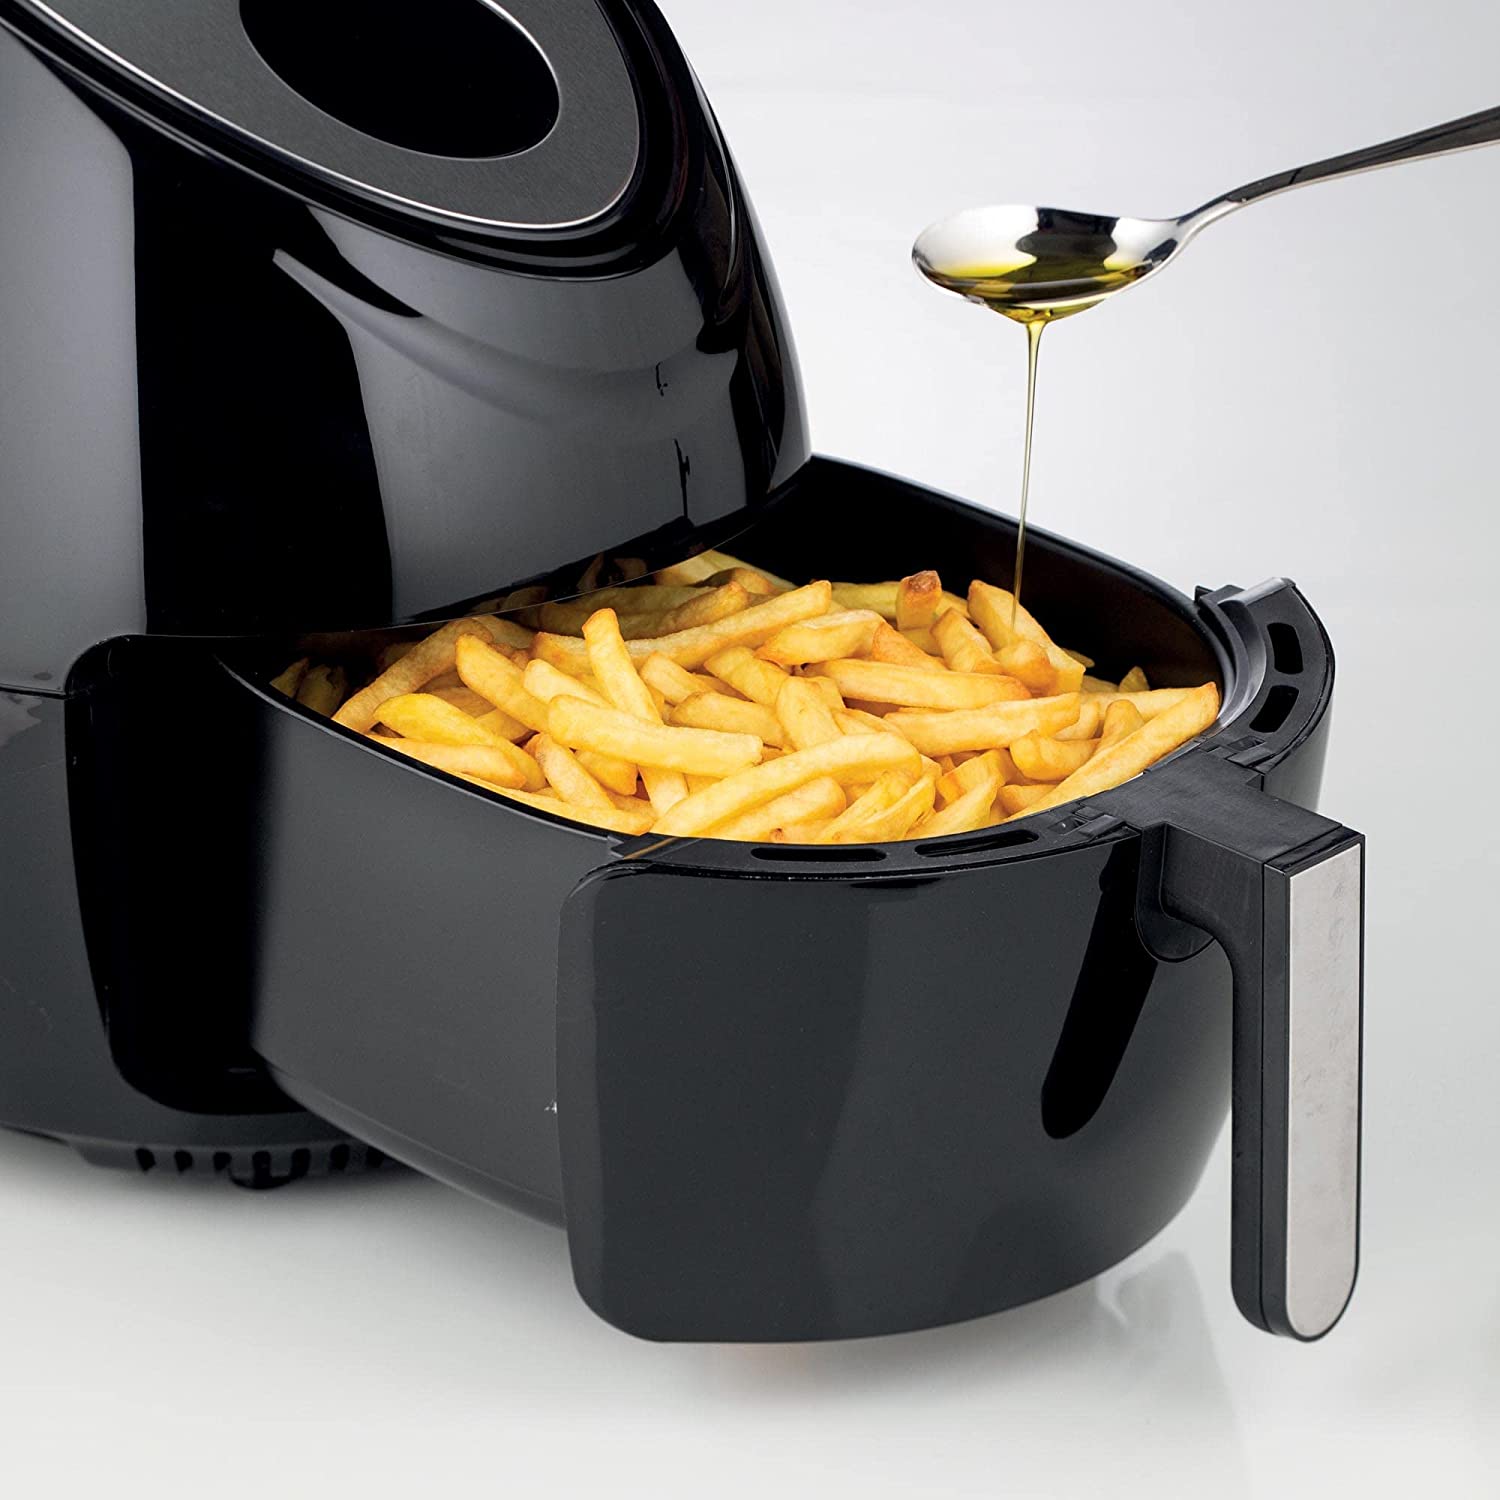 Ariete 4618 Airy Fryer XXL, Air Fryer, 5.5 Liters, Fries Without Oil 2